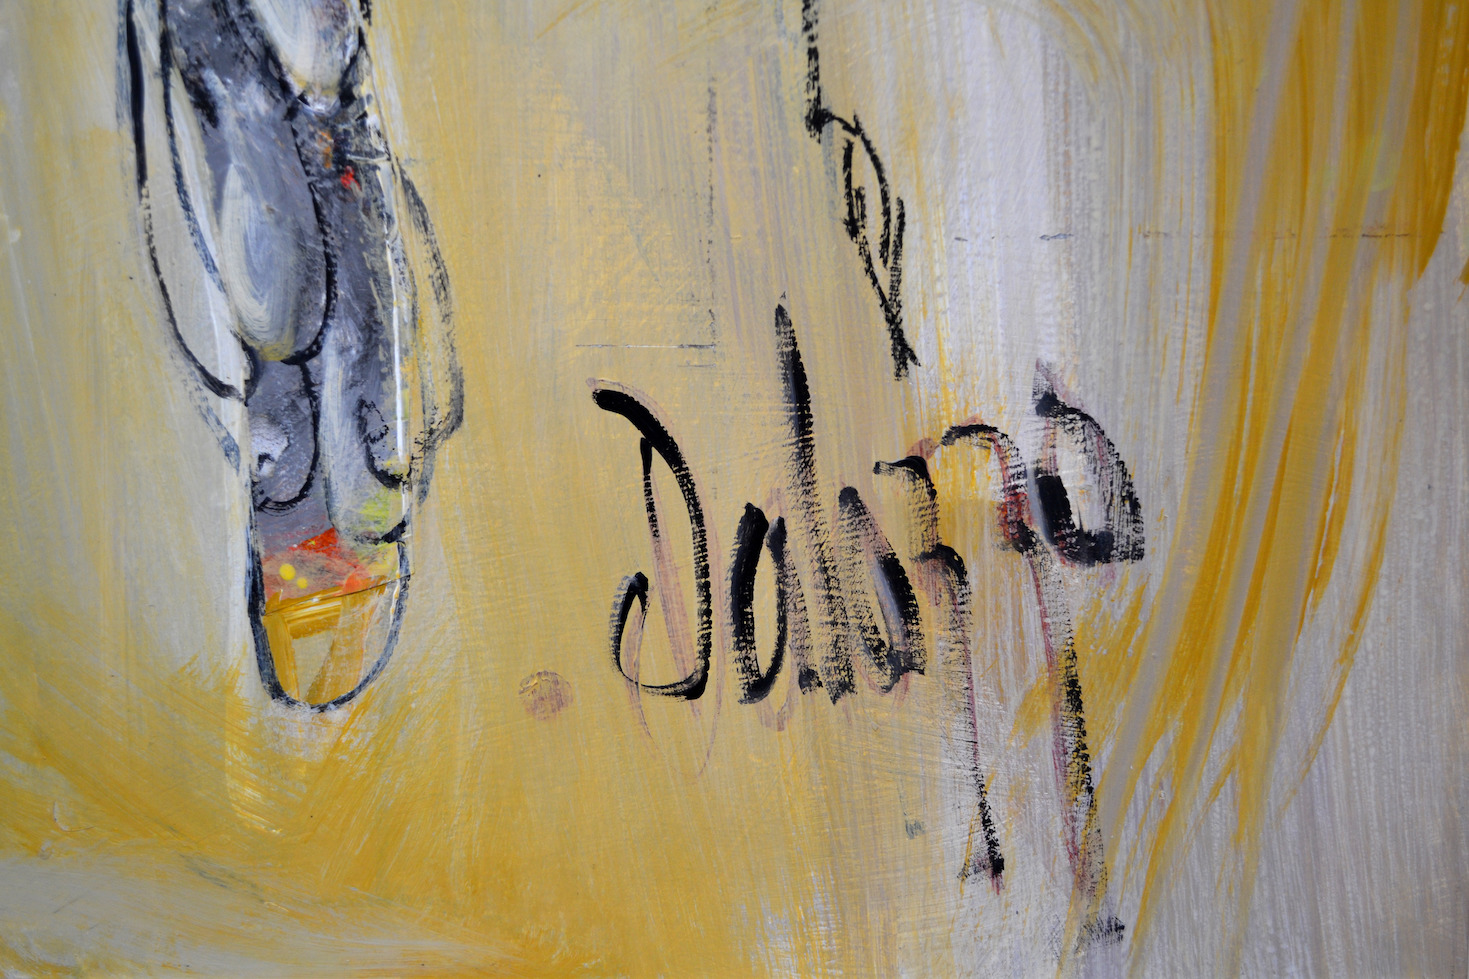 Close Up Signature Of Mixed Media Painting "Animal Magnetism 25" By Lucette Dalozzo